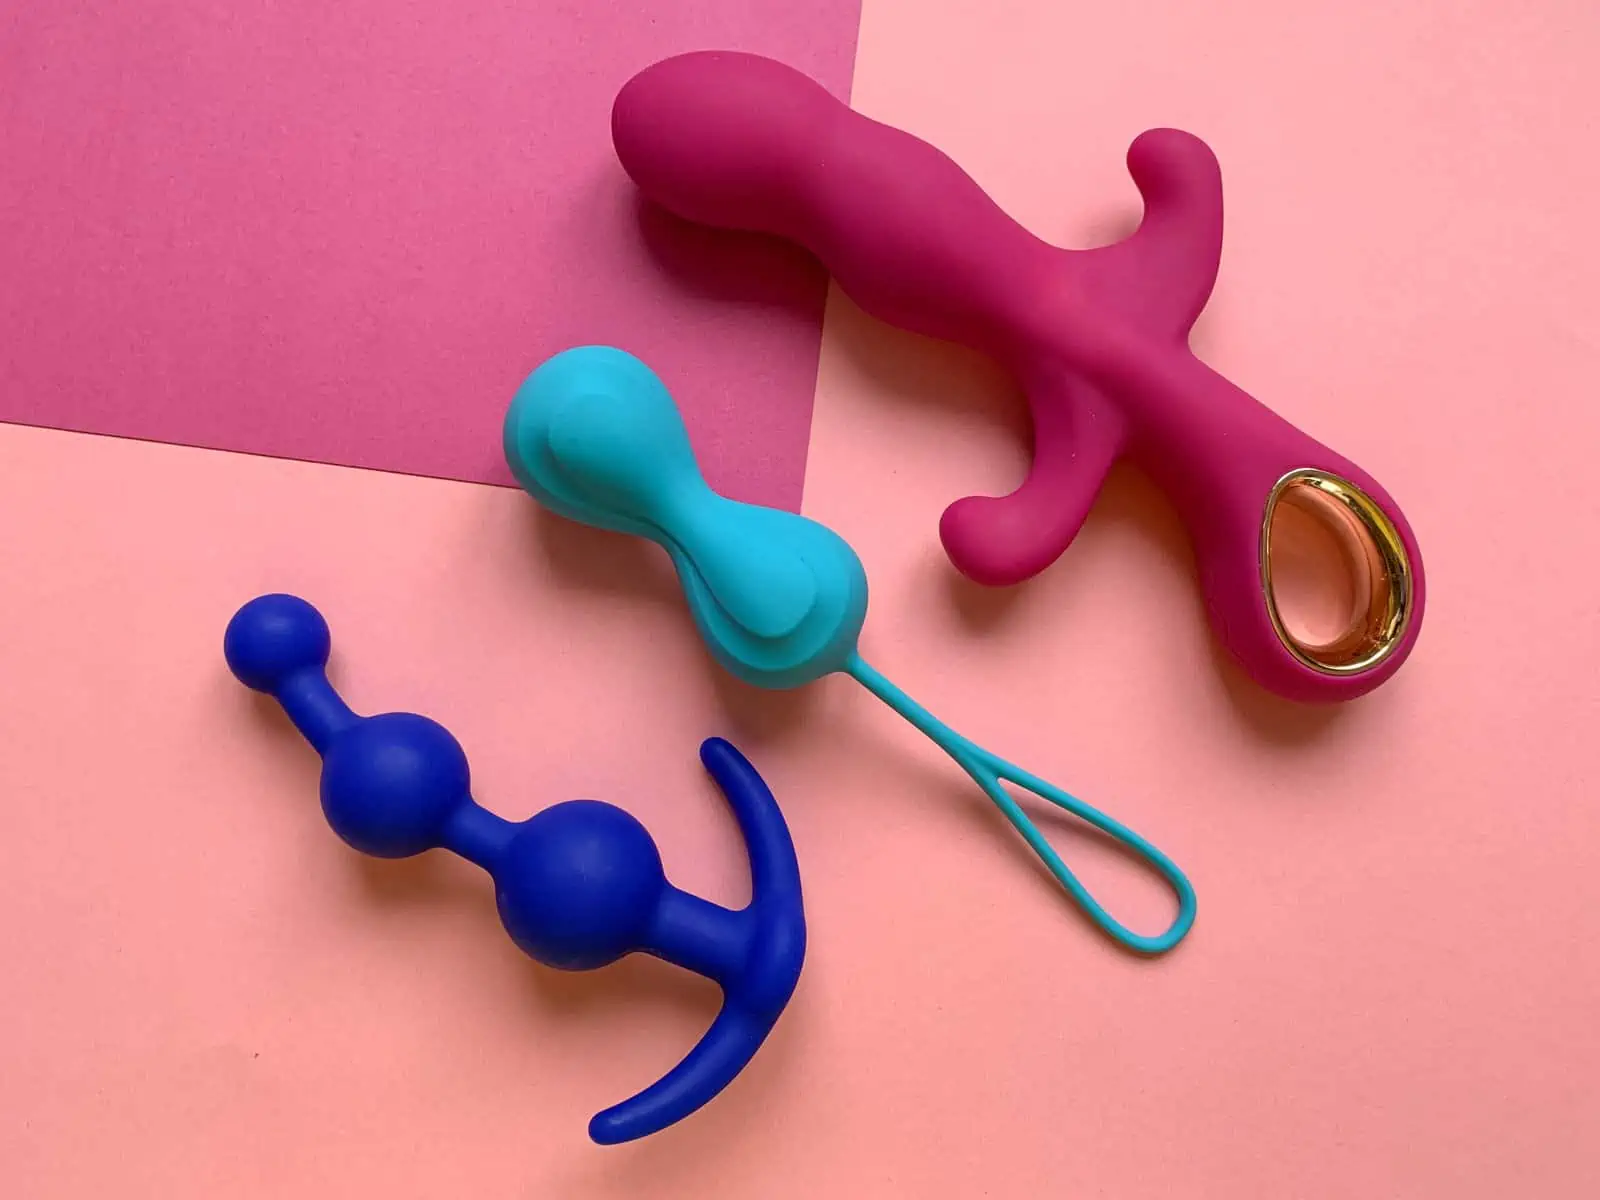 A pair of scissors and a fake mustache on a pink and blue background